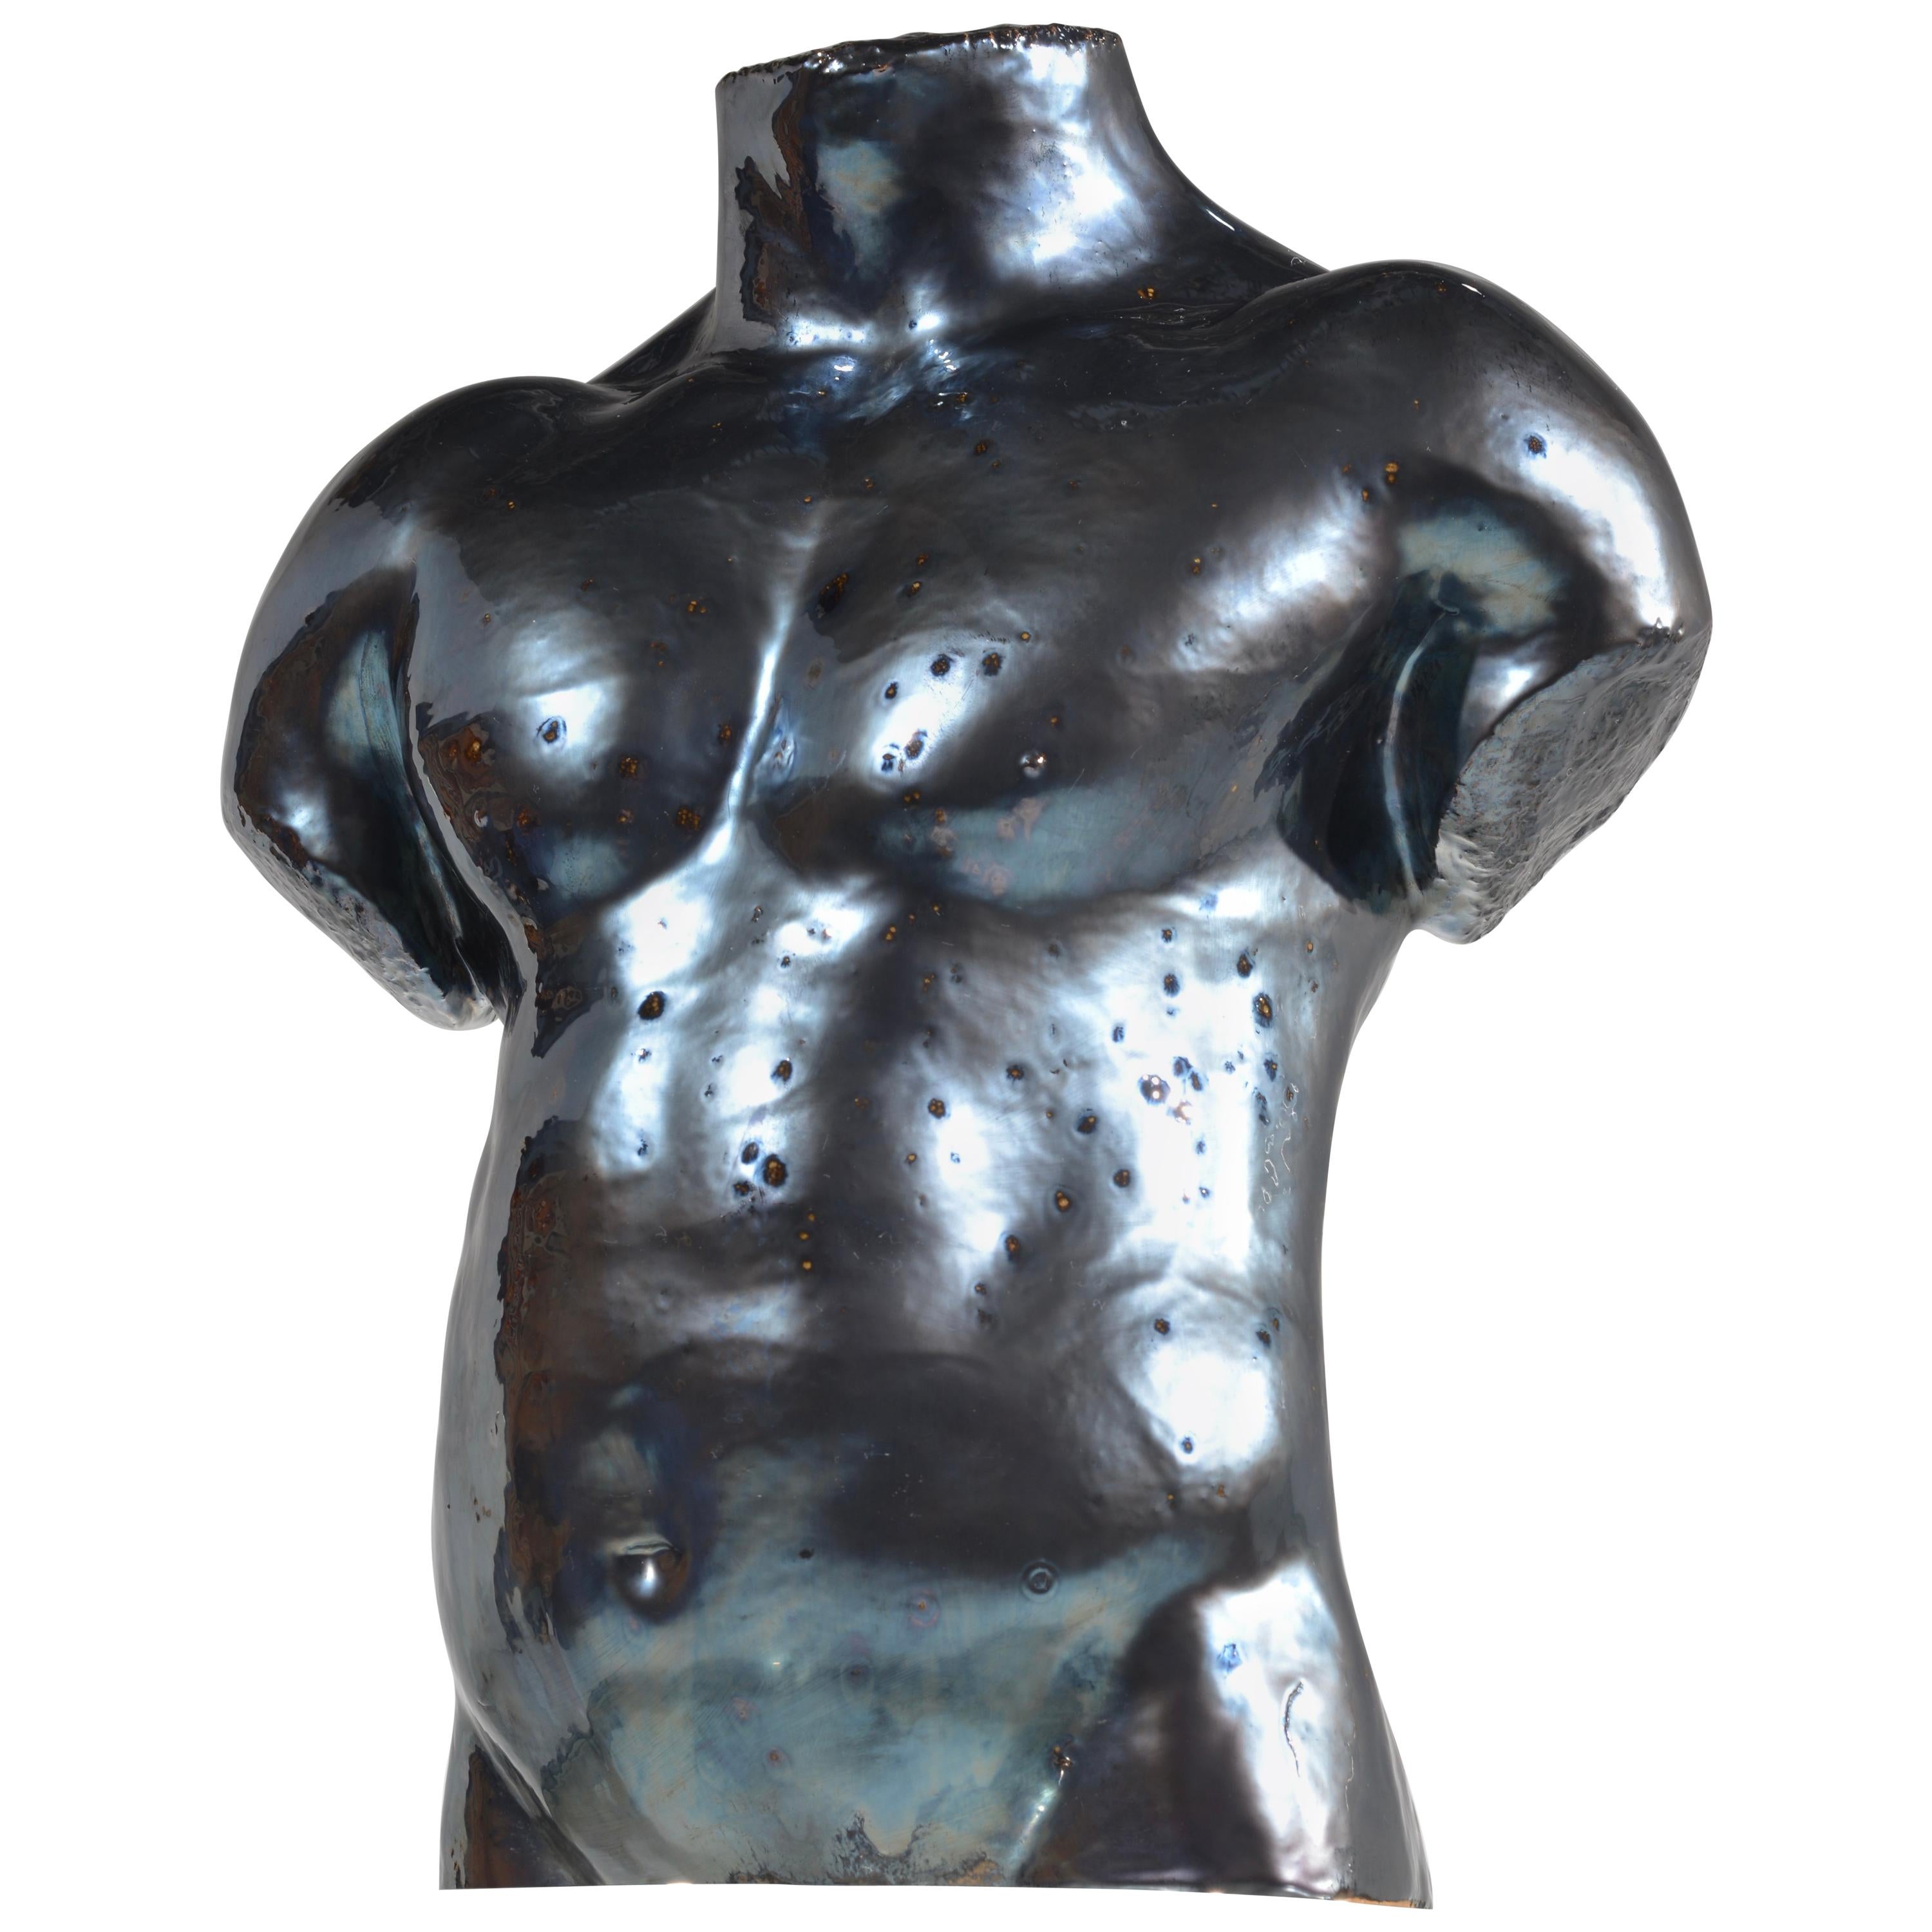 Life Size Ceramic Male Bust by Artist S Porter, circa 1985